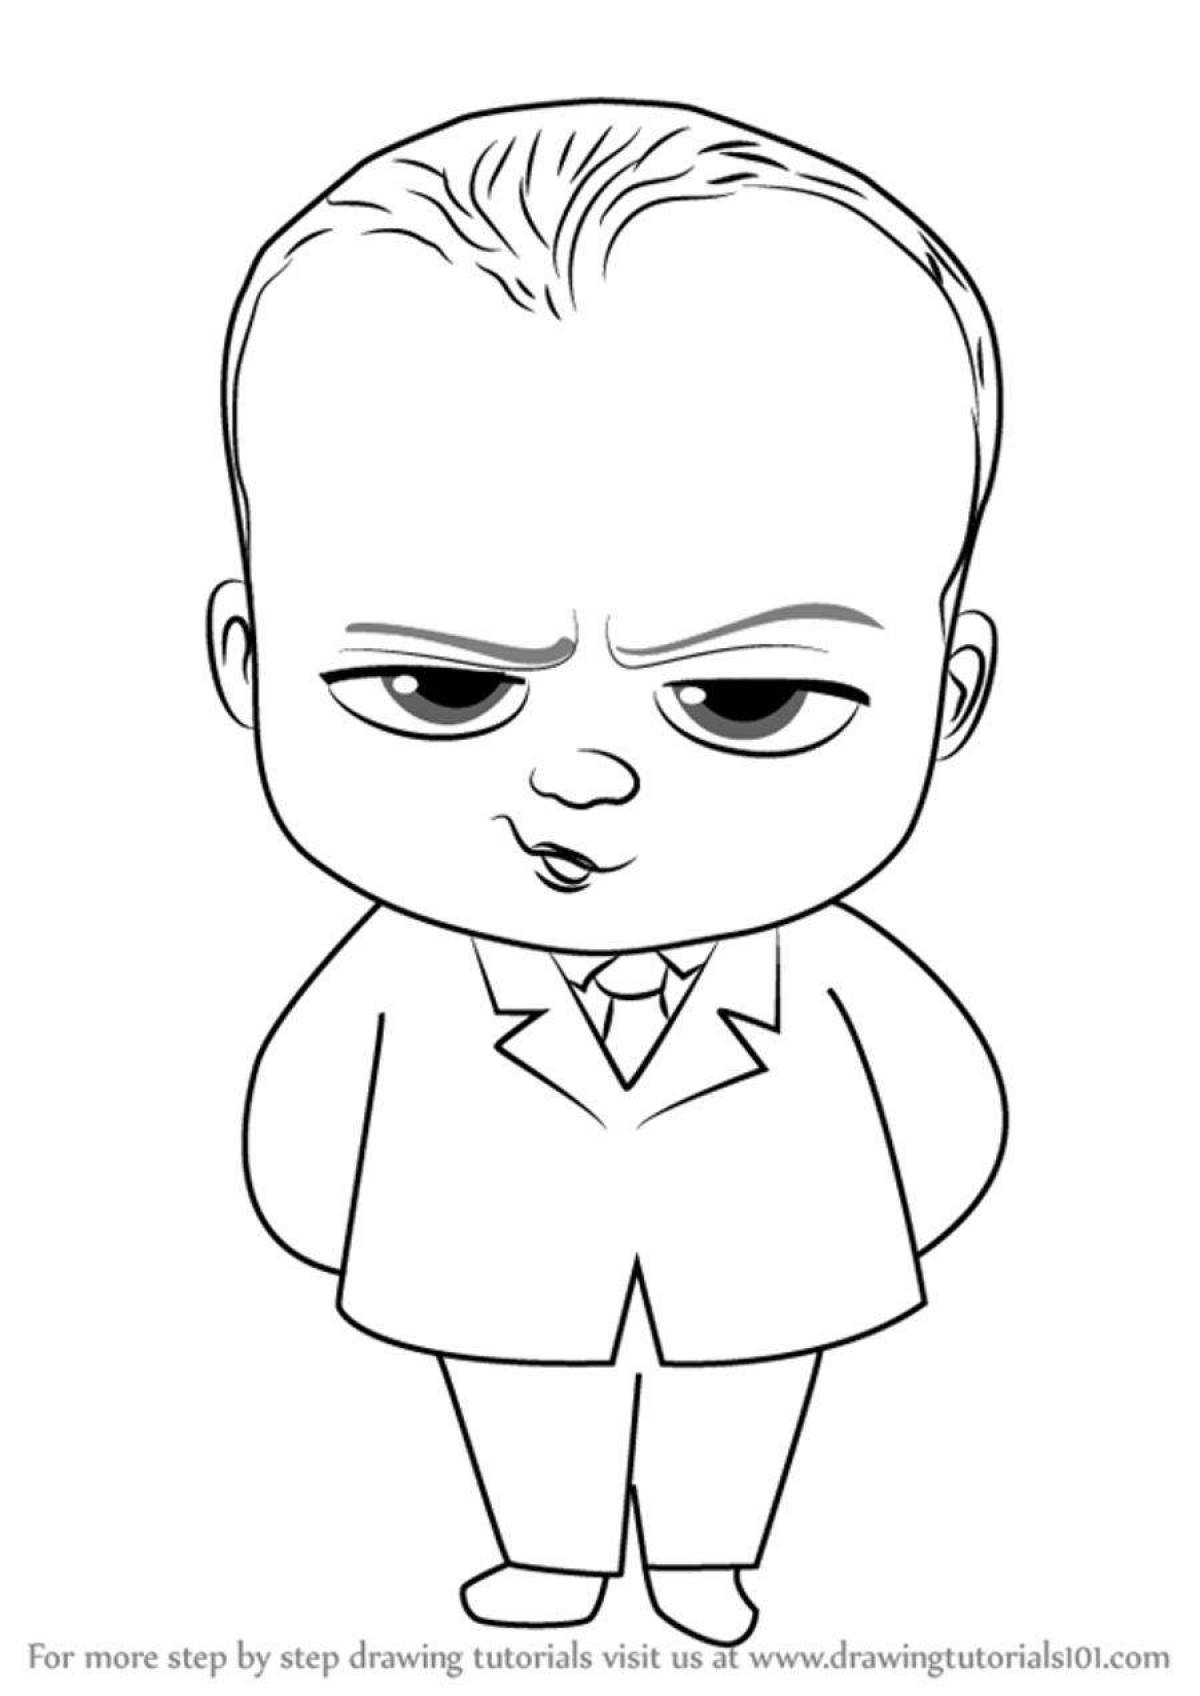 Coloring page adorable baby boss